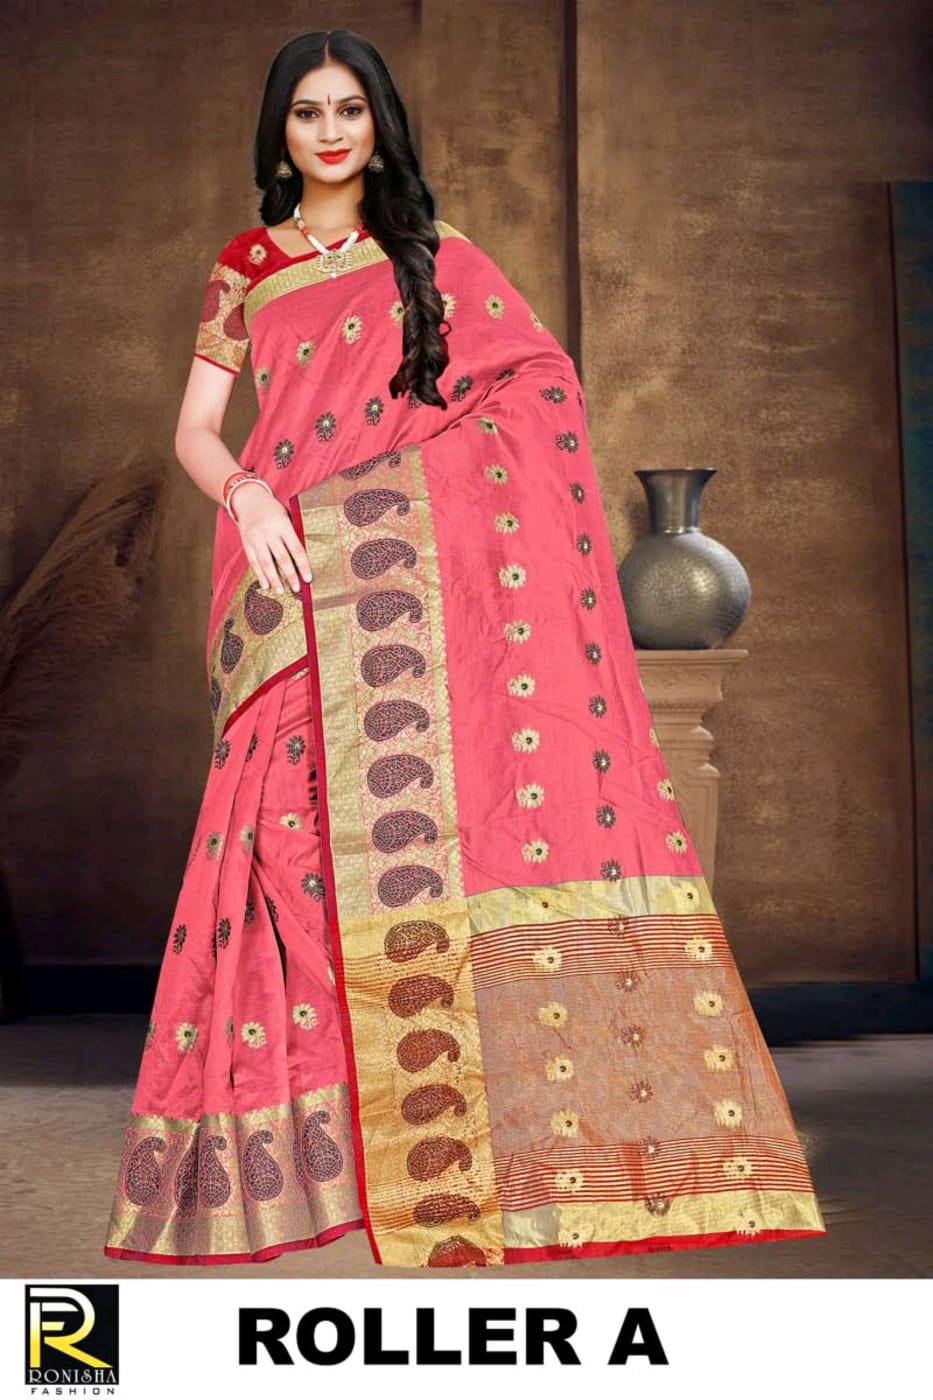 Ranjna Roller Casual Wear Cotton Silk Saree Amazing Collection Online Shop